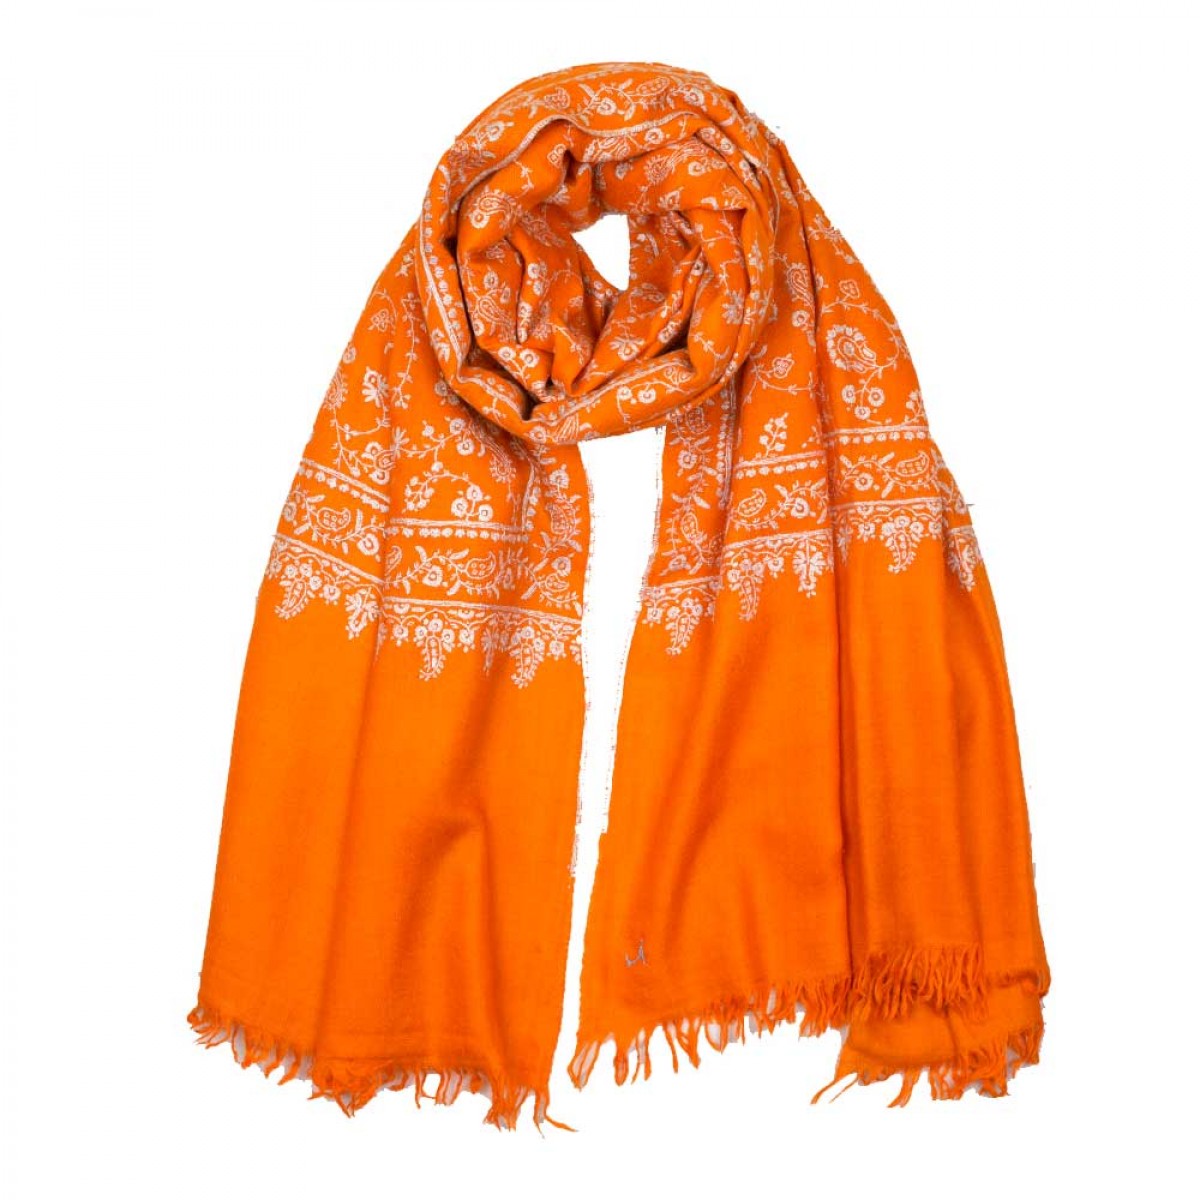 Embroidered Pashmina Shawls - Coral